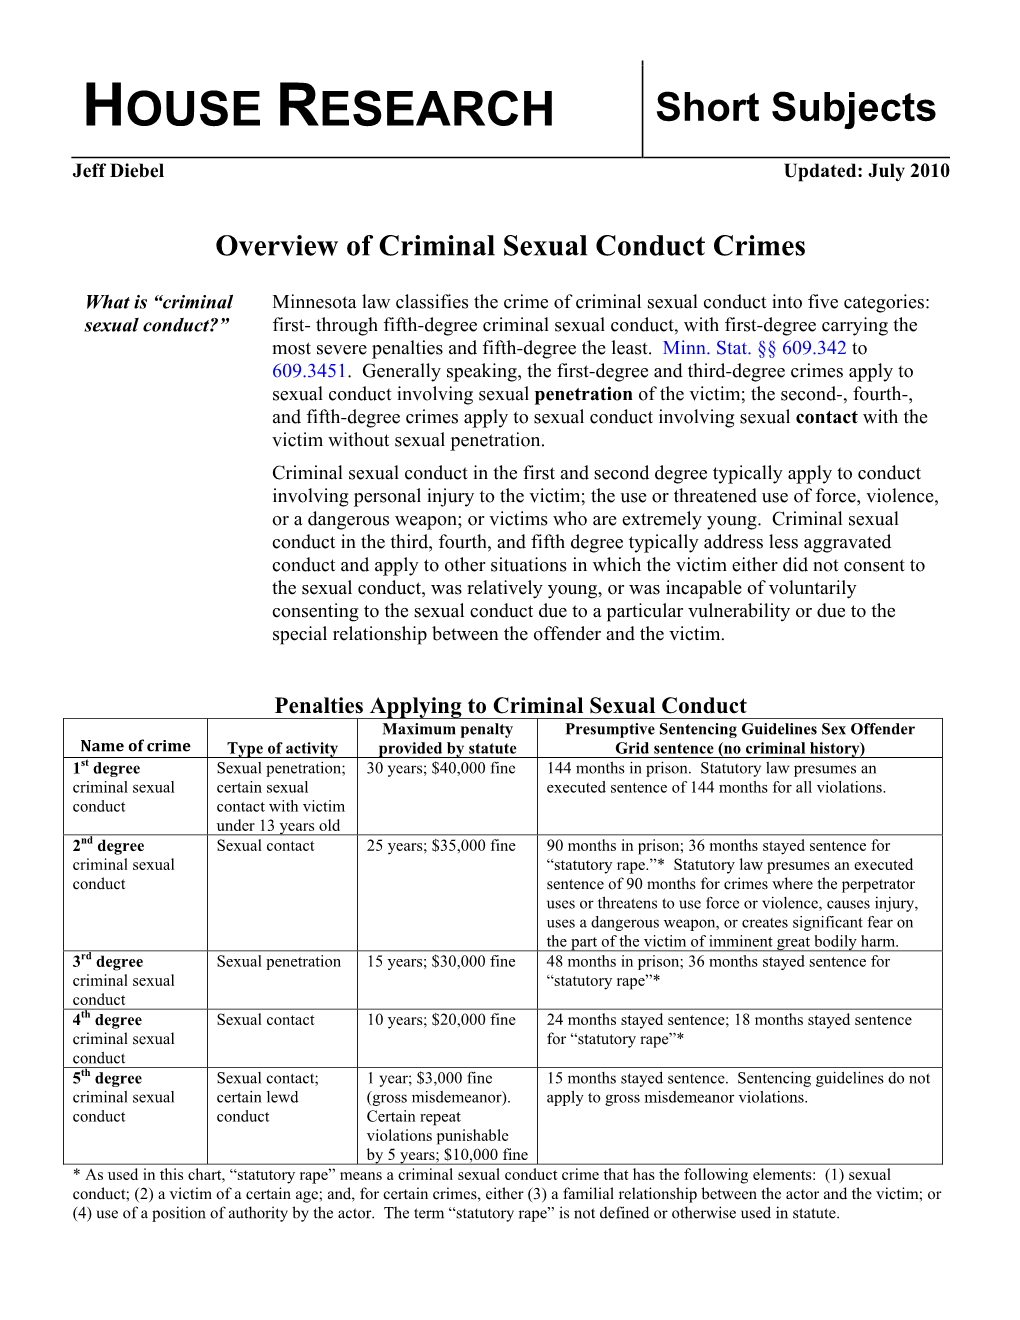 Overview of Criminal Sexual Conduct Crimes